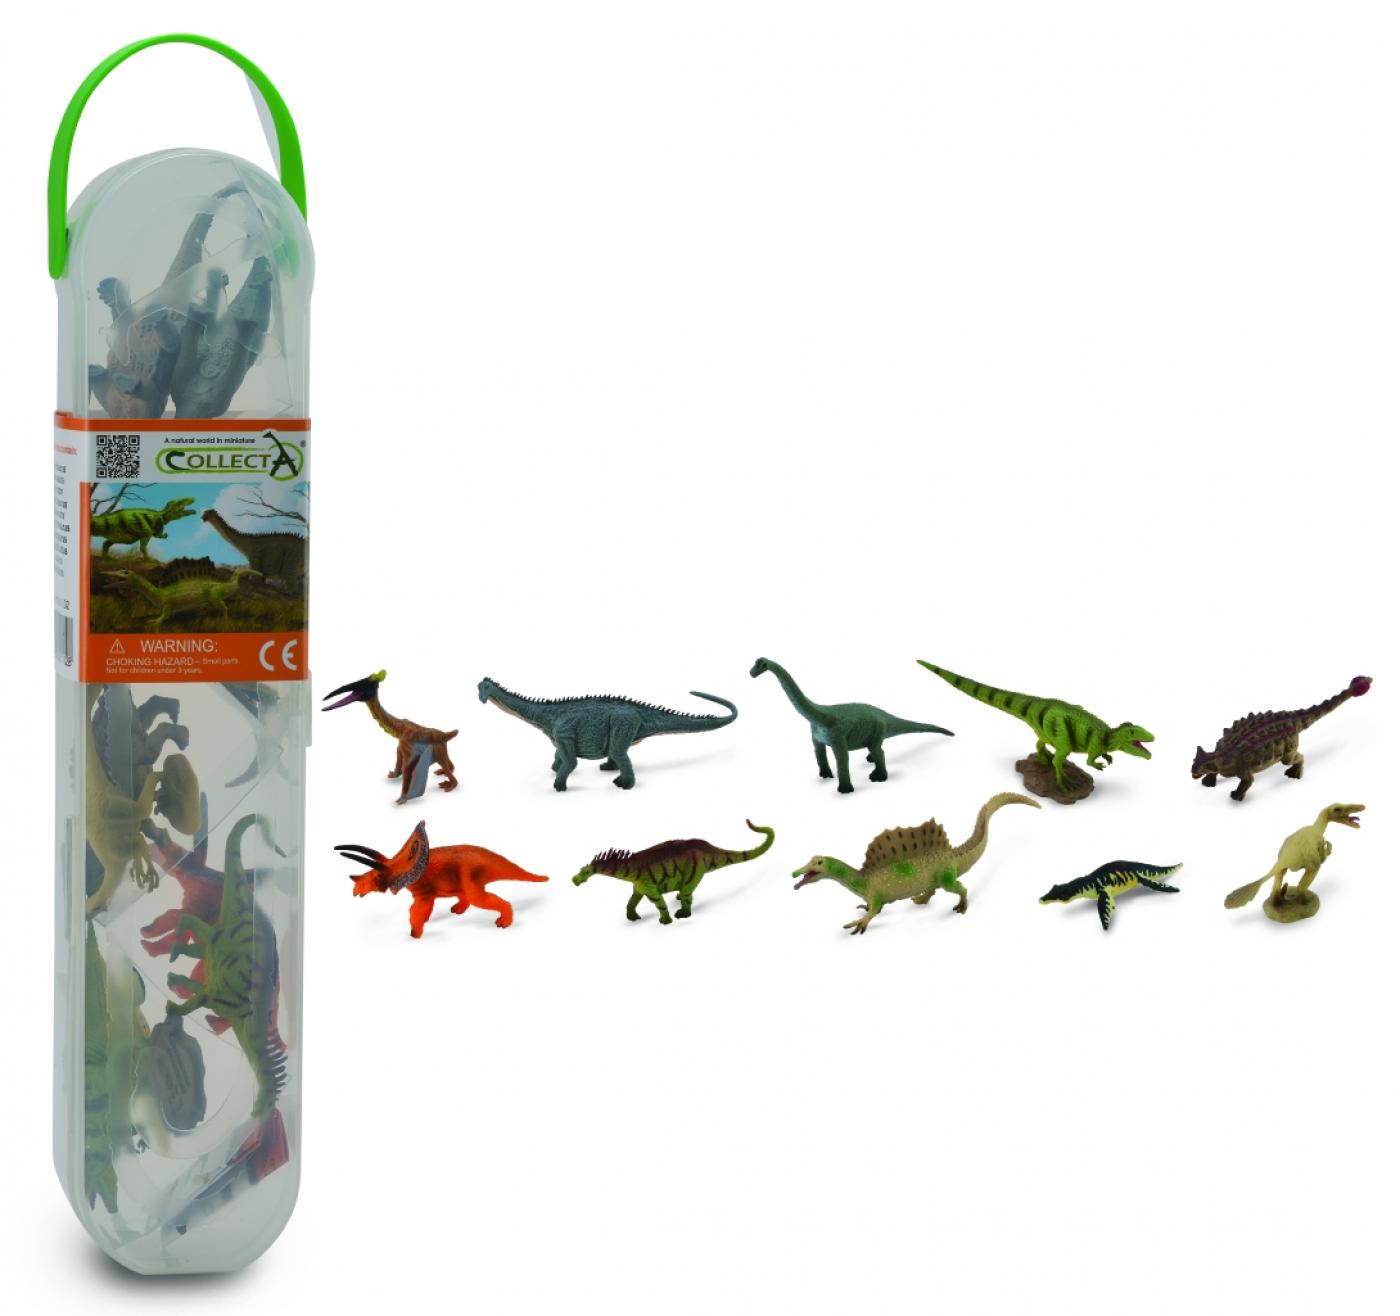 Collecta Mini Dinosaurs | vlr.eng.br